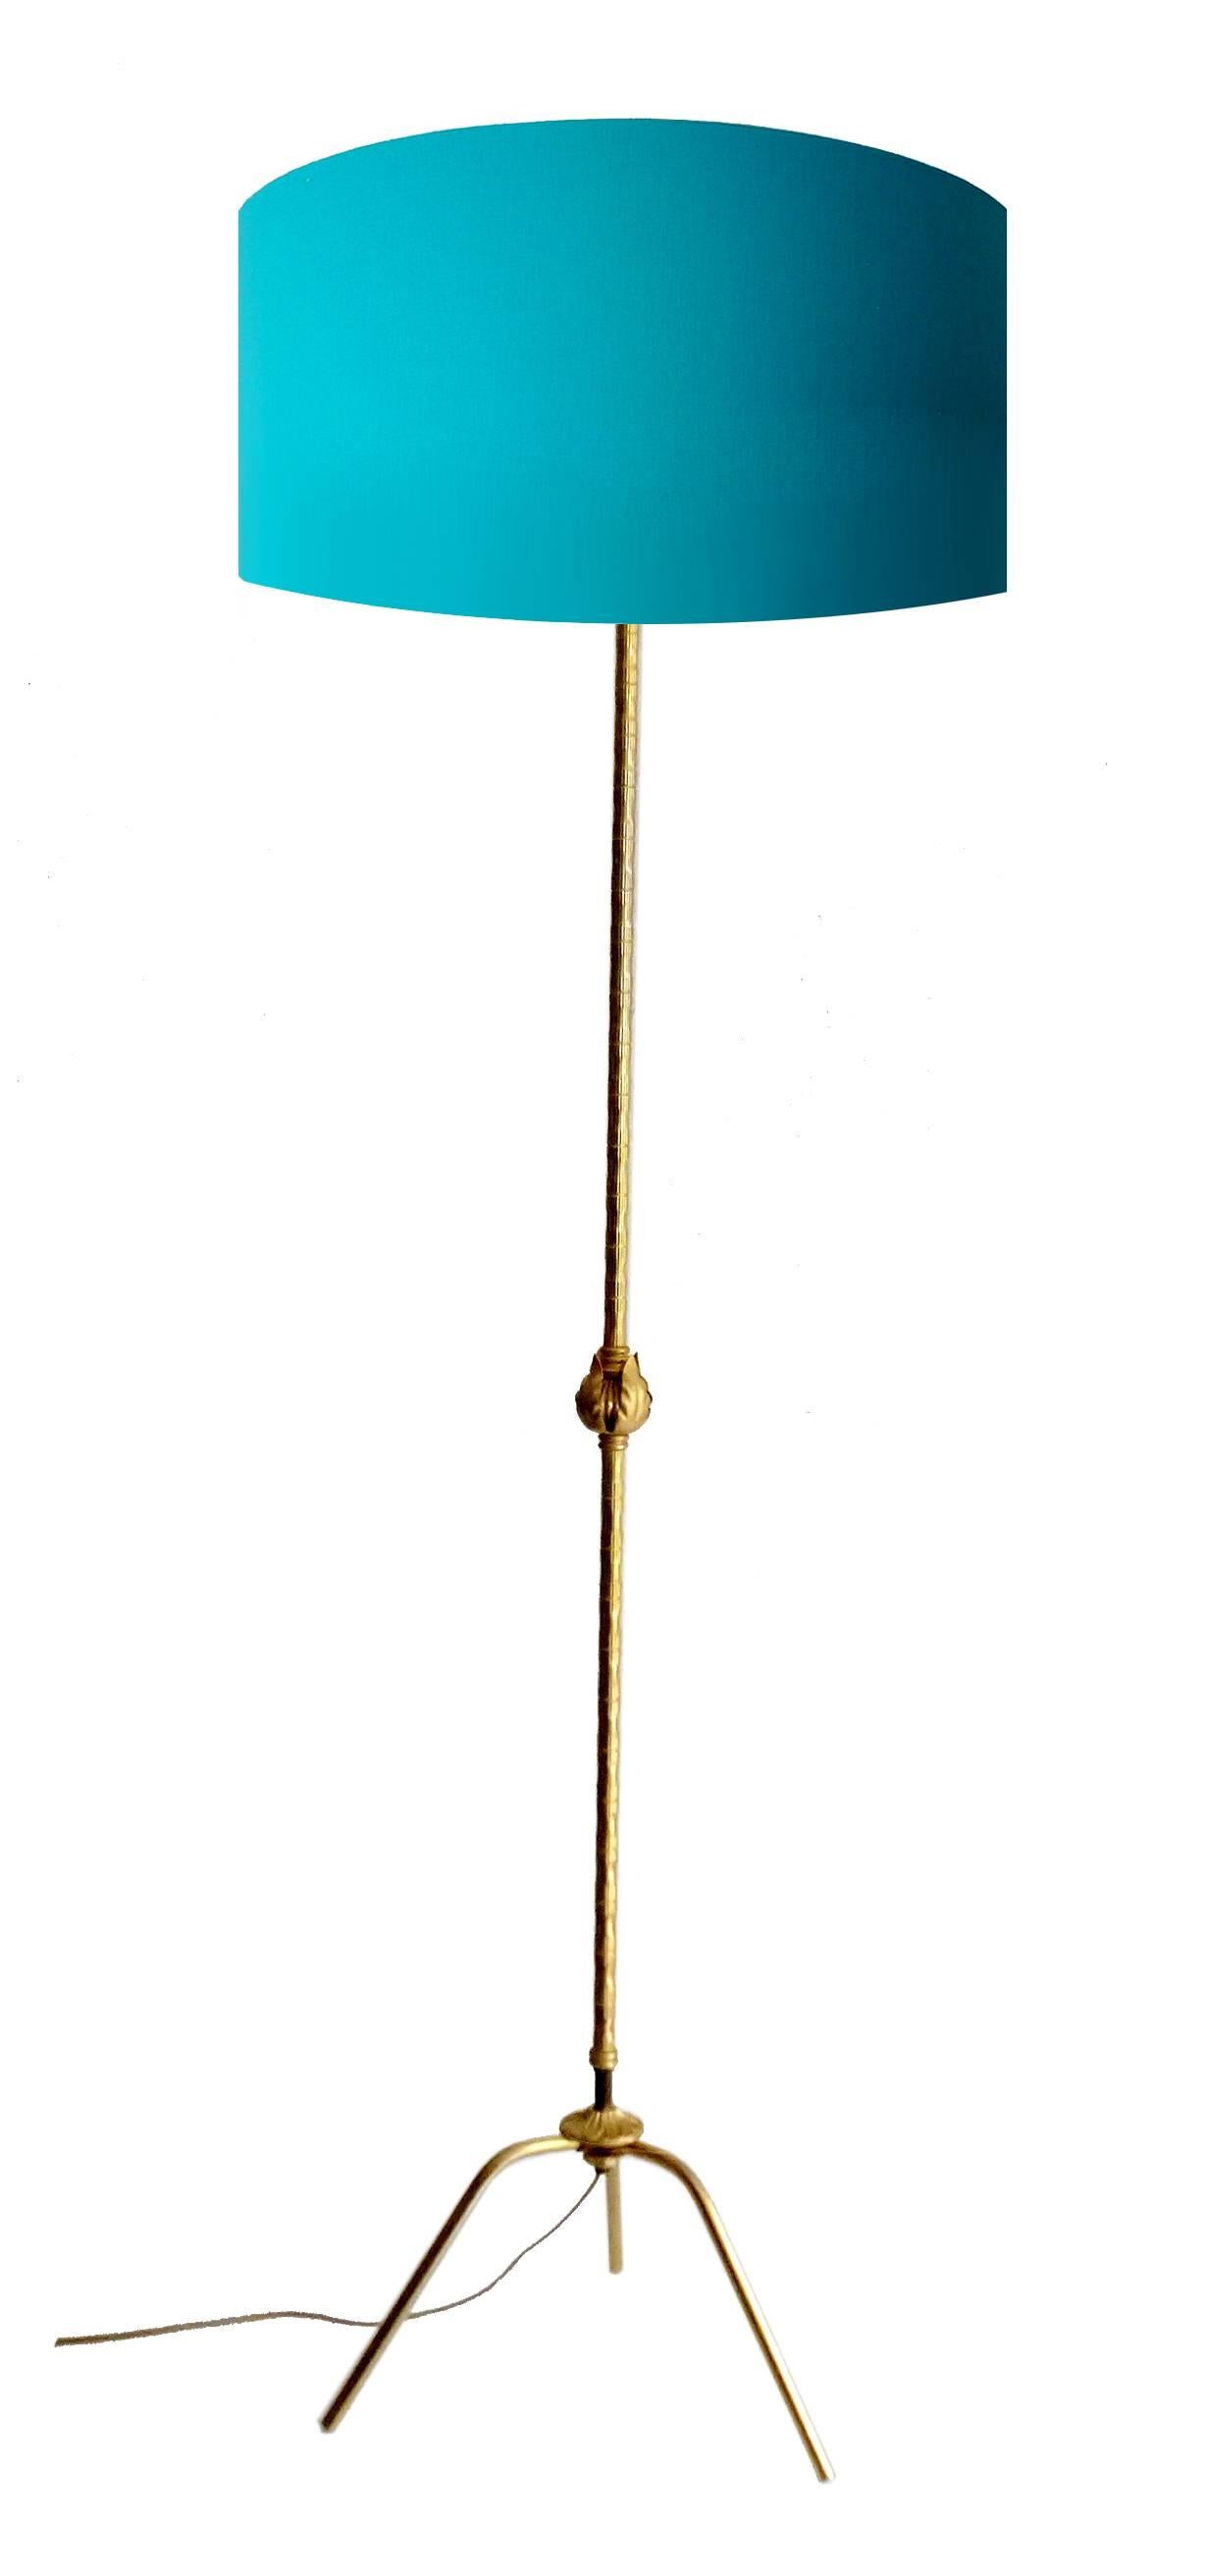 All our light´s electricals are professionally checked and tested for worldwide use
French Mid-Century floor lamp, probably a Maison Bagues design,  featuring a bamboo brass pole with an triple acanthus leaf central piece, brass claw feet tripod